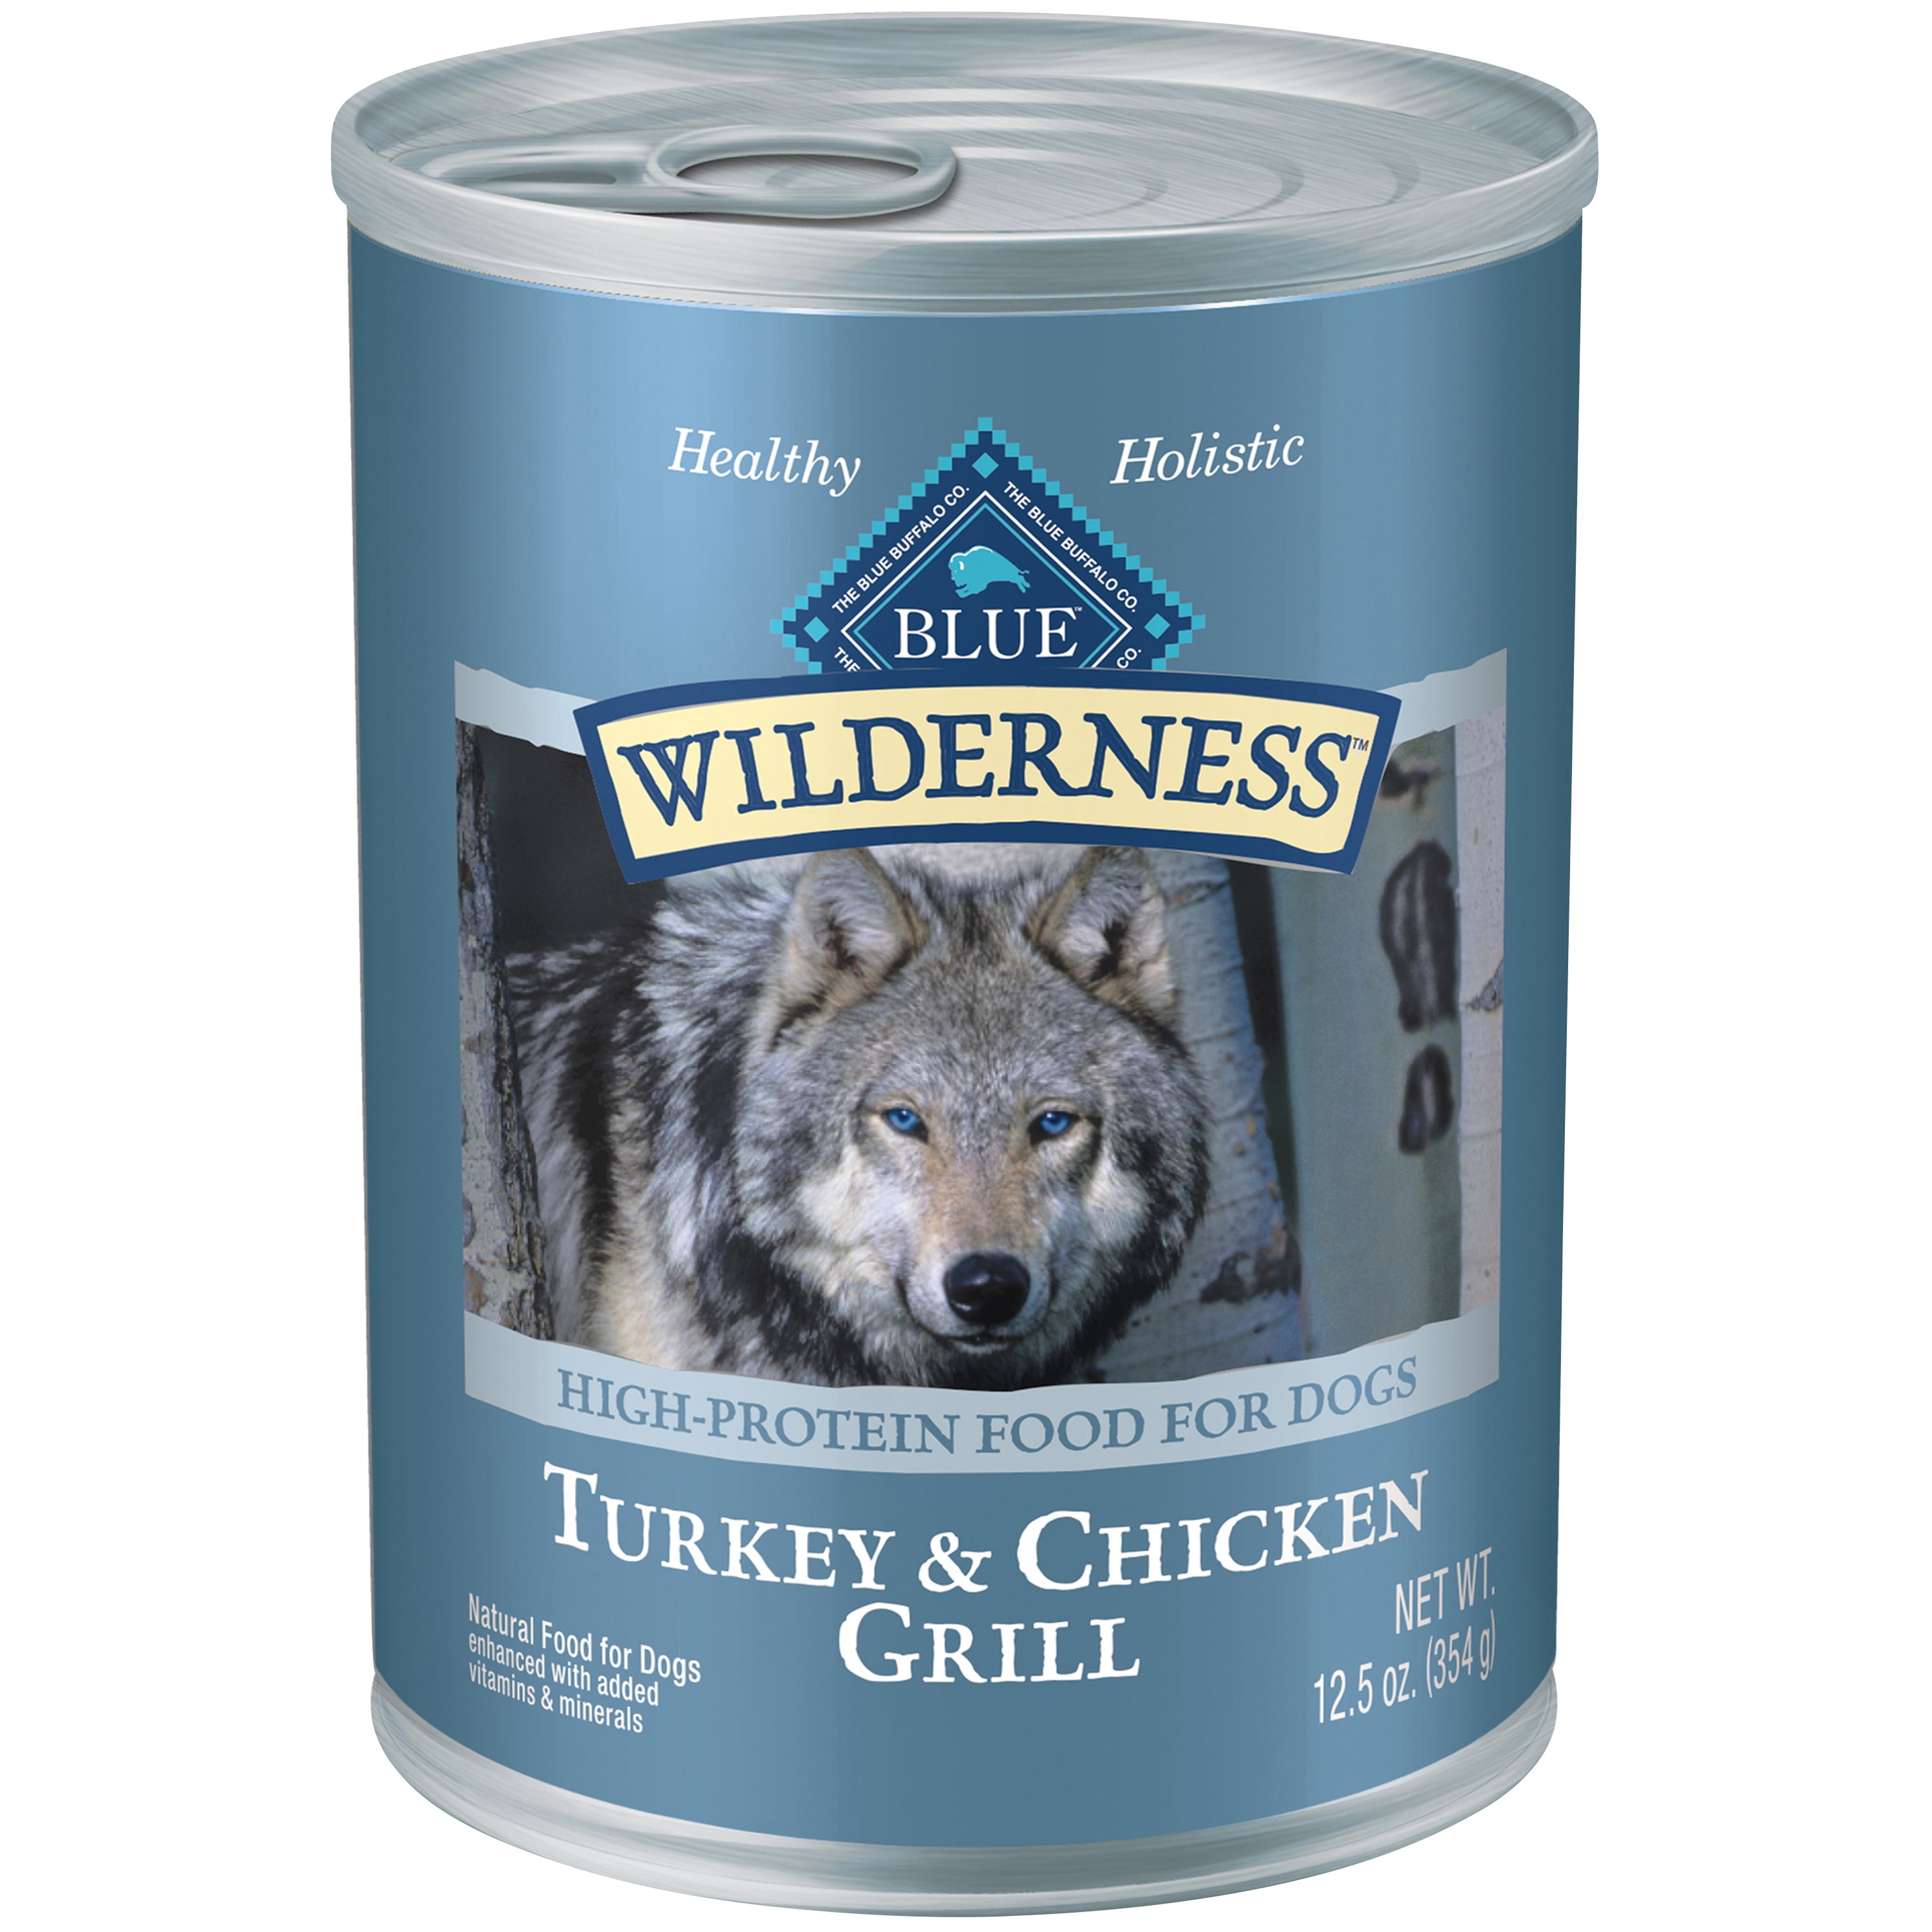 Blue Buffalo Wilderness High Protein Turkey and Chicken Wet Dog Food for Adult Dogs, Grain-Free, 12.5 oz. Can